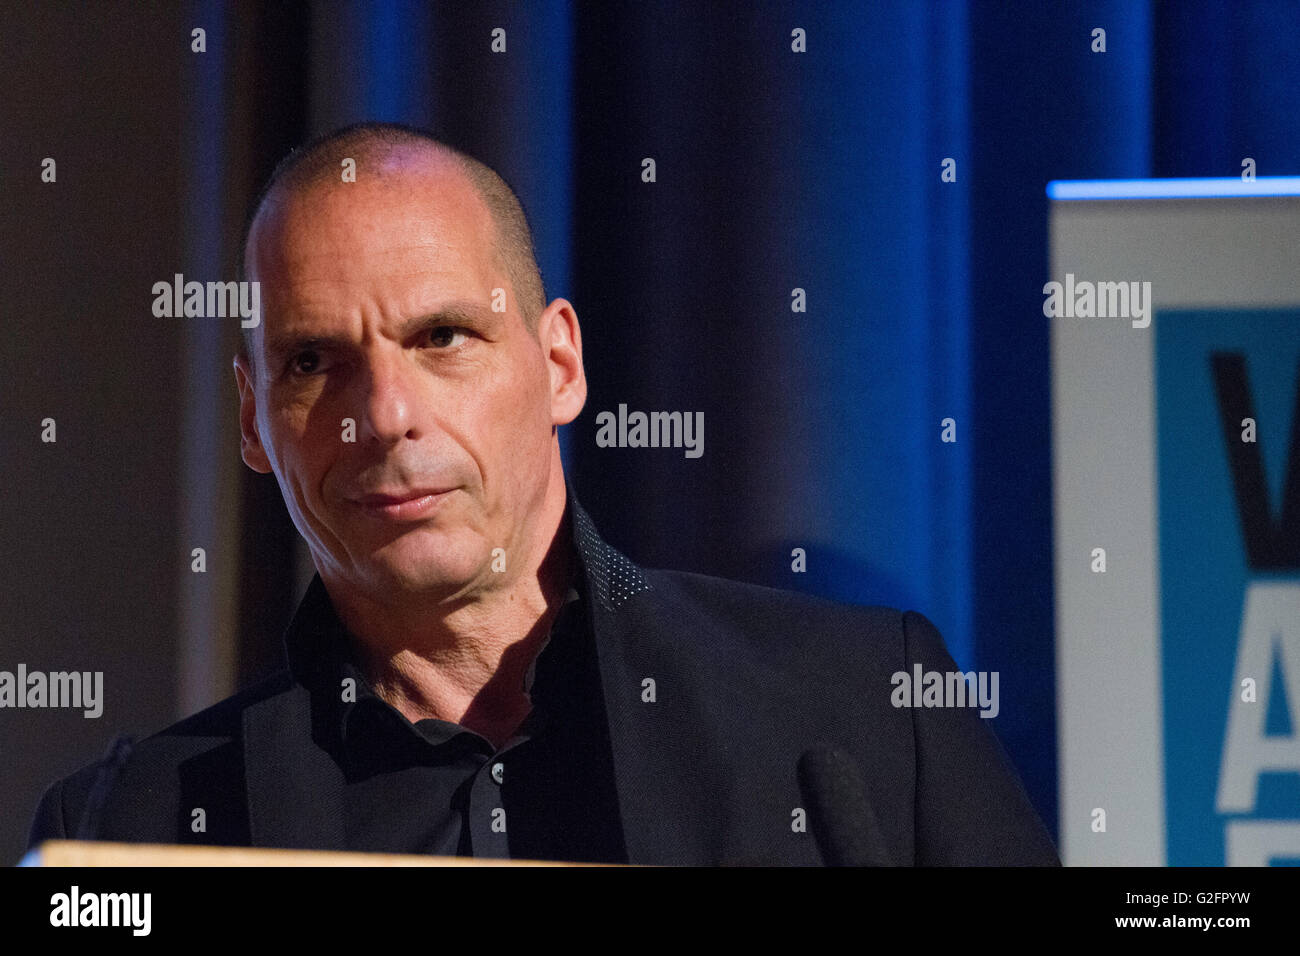 London, England. 28th May 2016. Former Greek finance minister Yanis Varoufakis talks at the pro-Europe rally making the case for Stock Photo